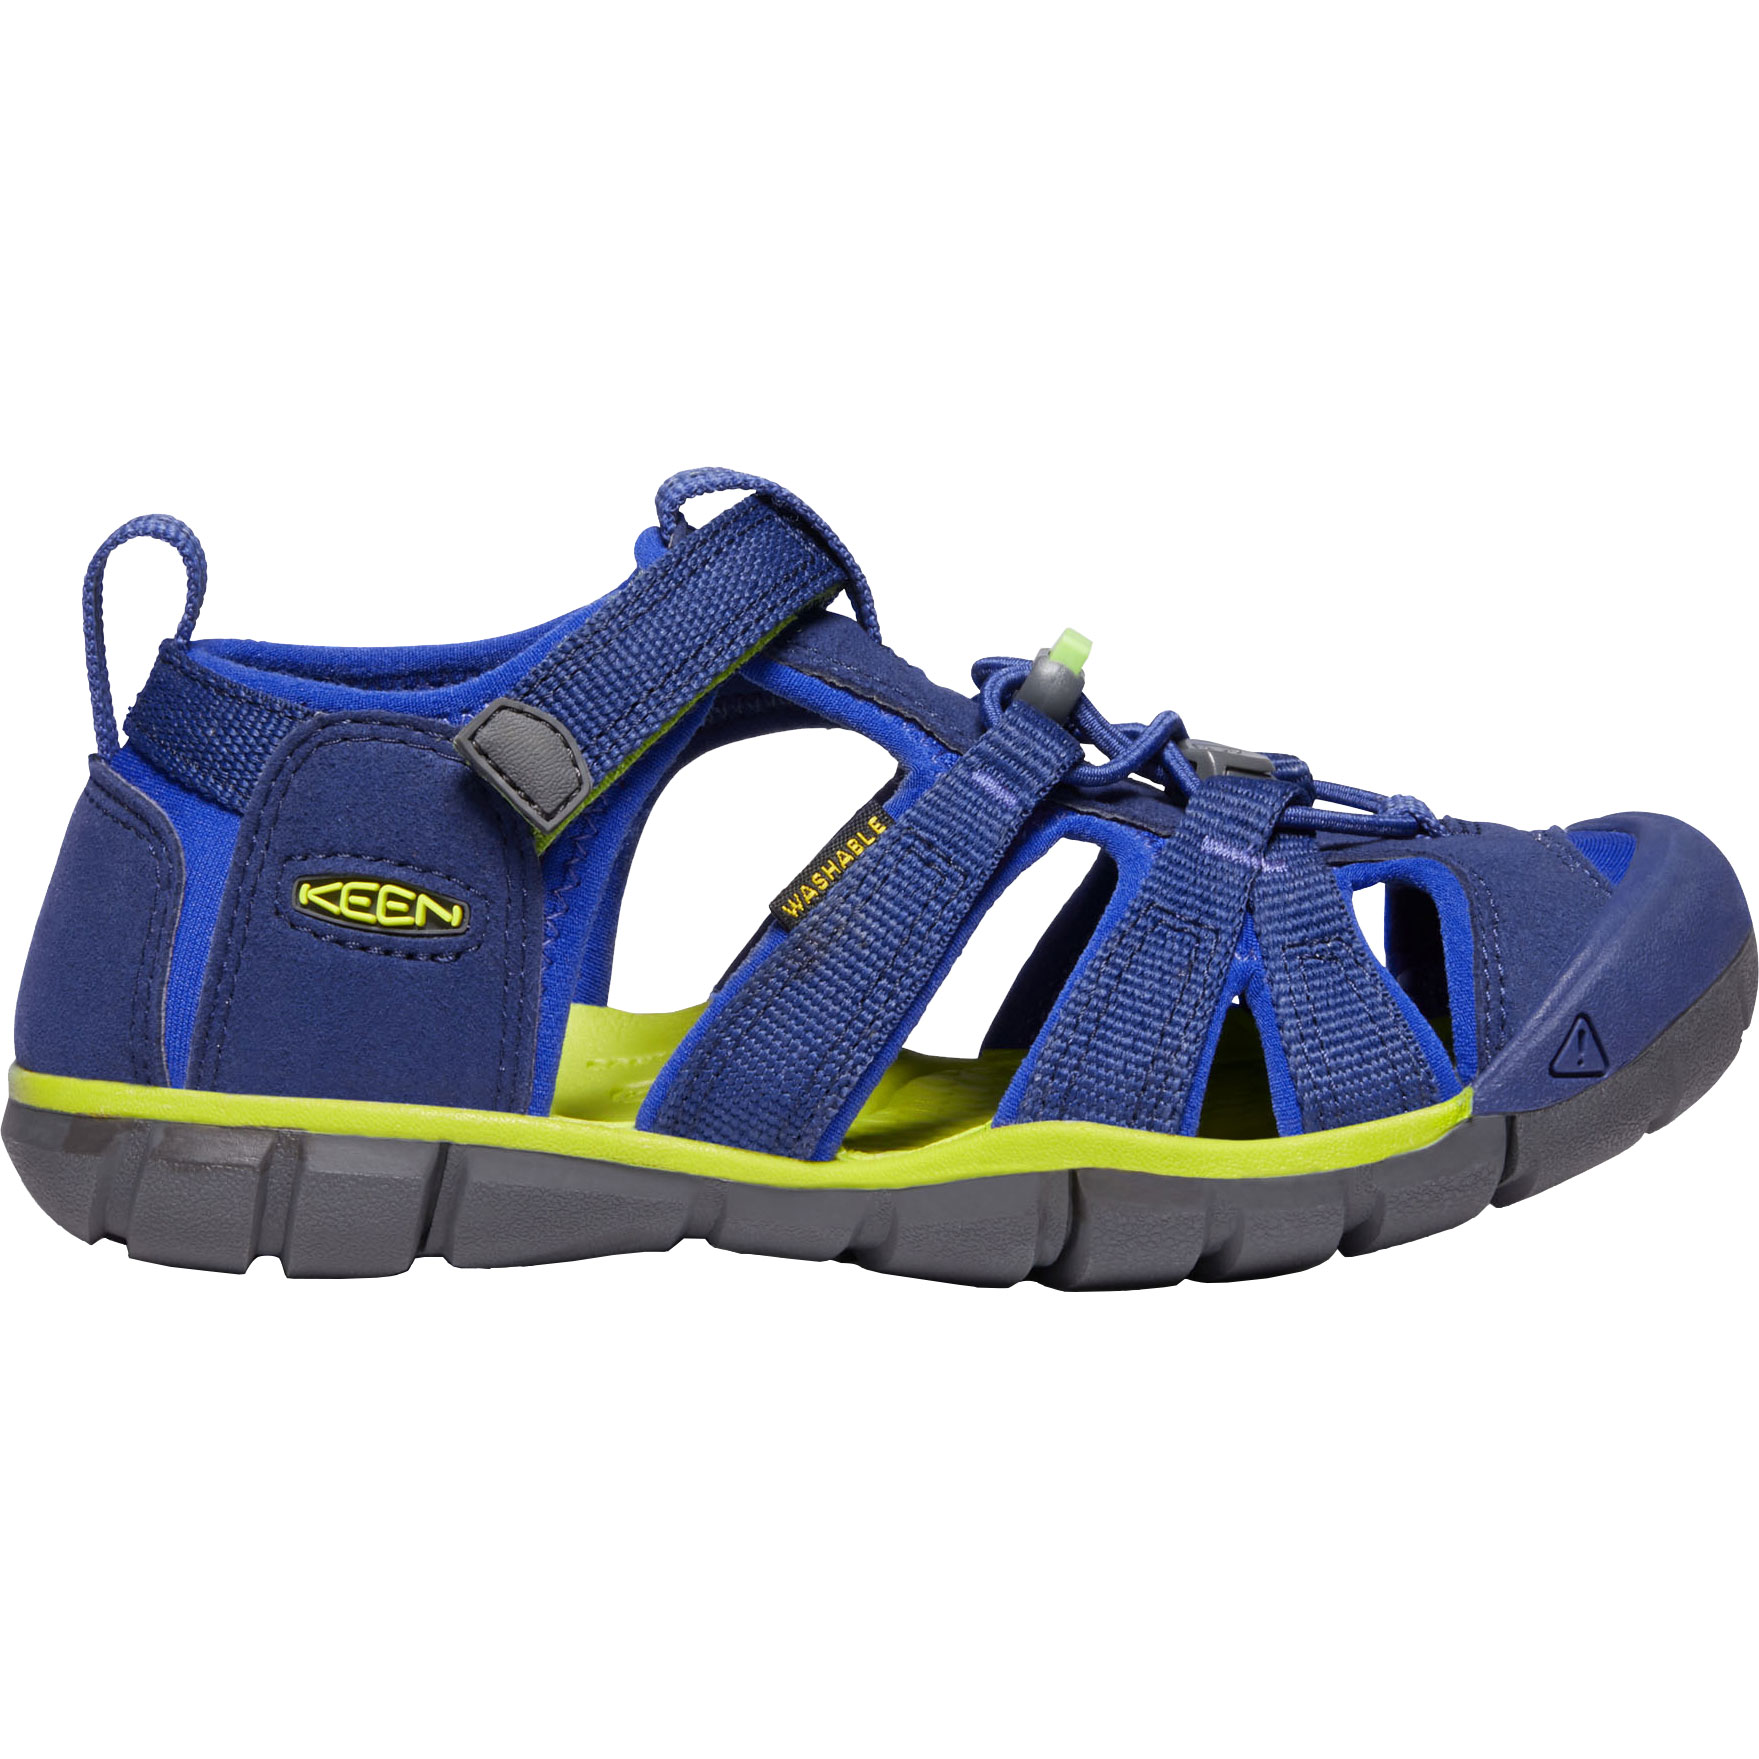 Picture of KEEN Seacamp II CNX Sandals Kids - Blue Depths / Chartreuse